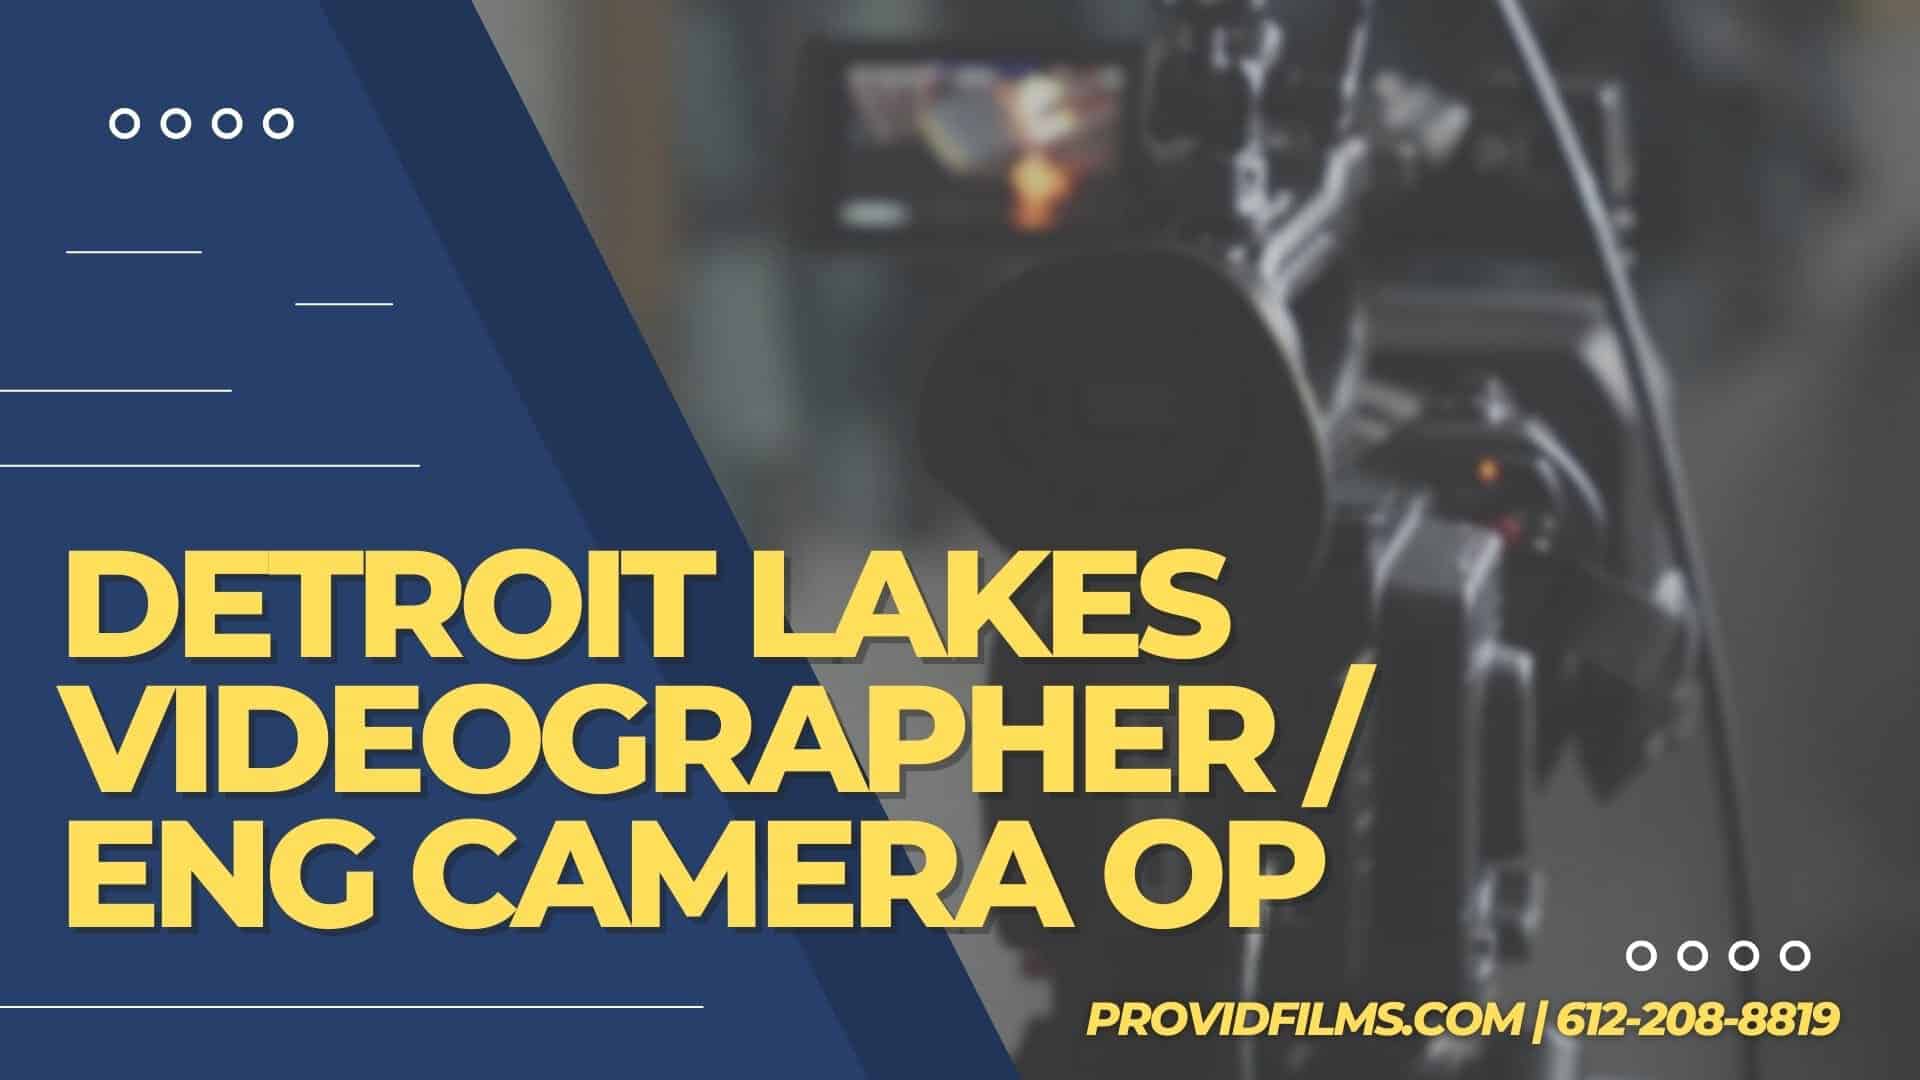 Graphic of a video camera with the text saying "Detroit Lakes Videographer / ENG Camera Op"